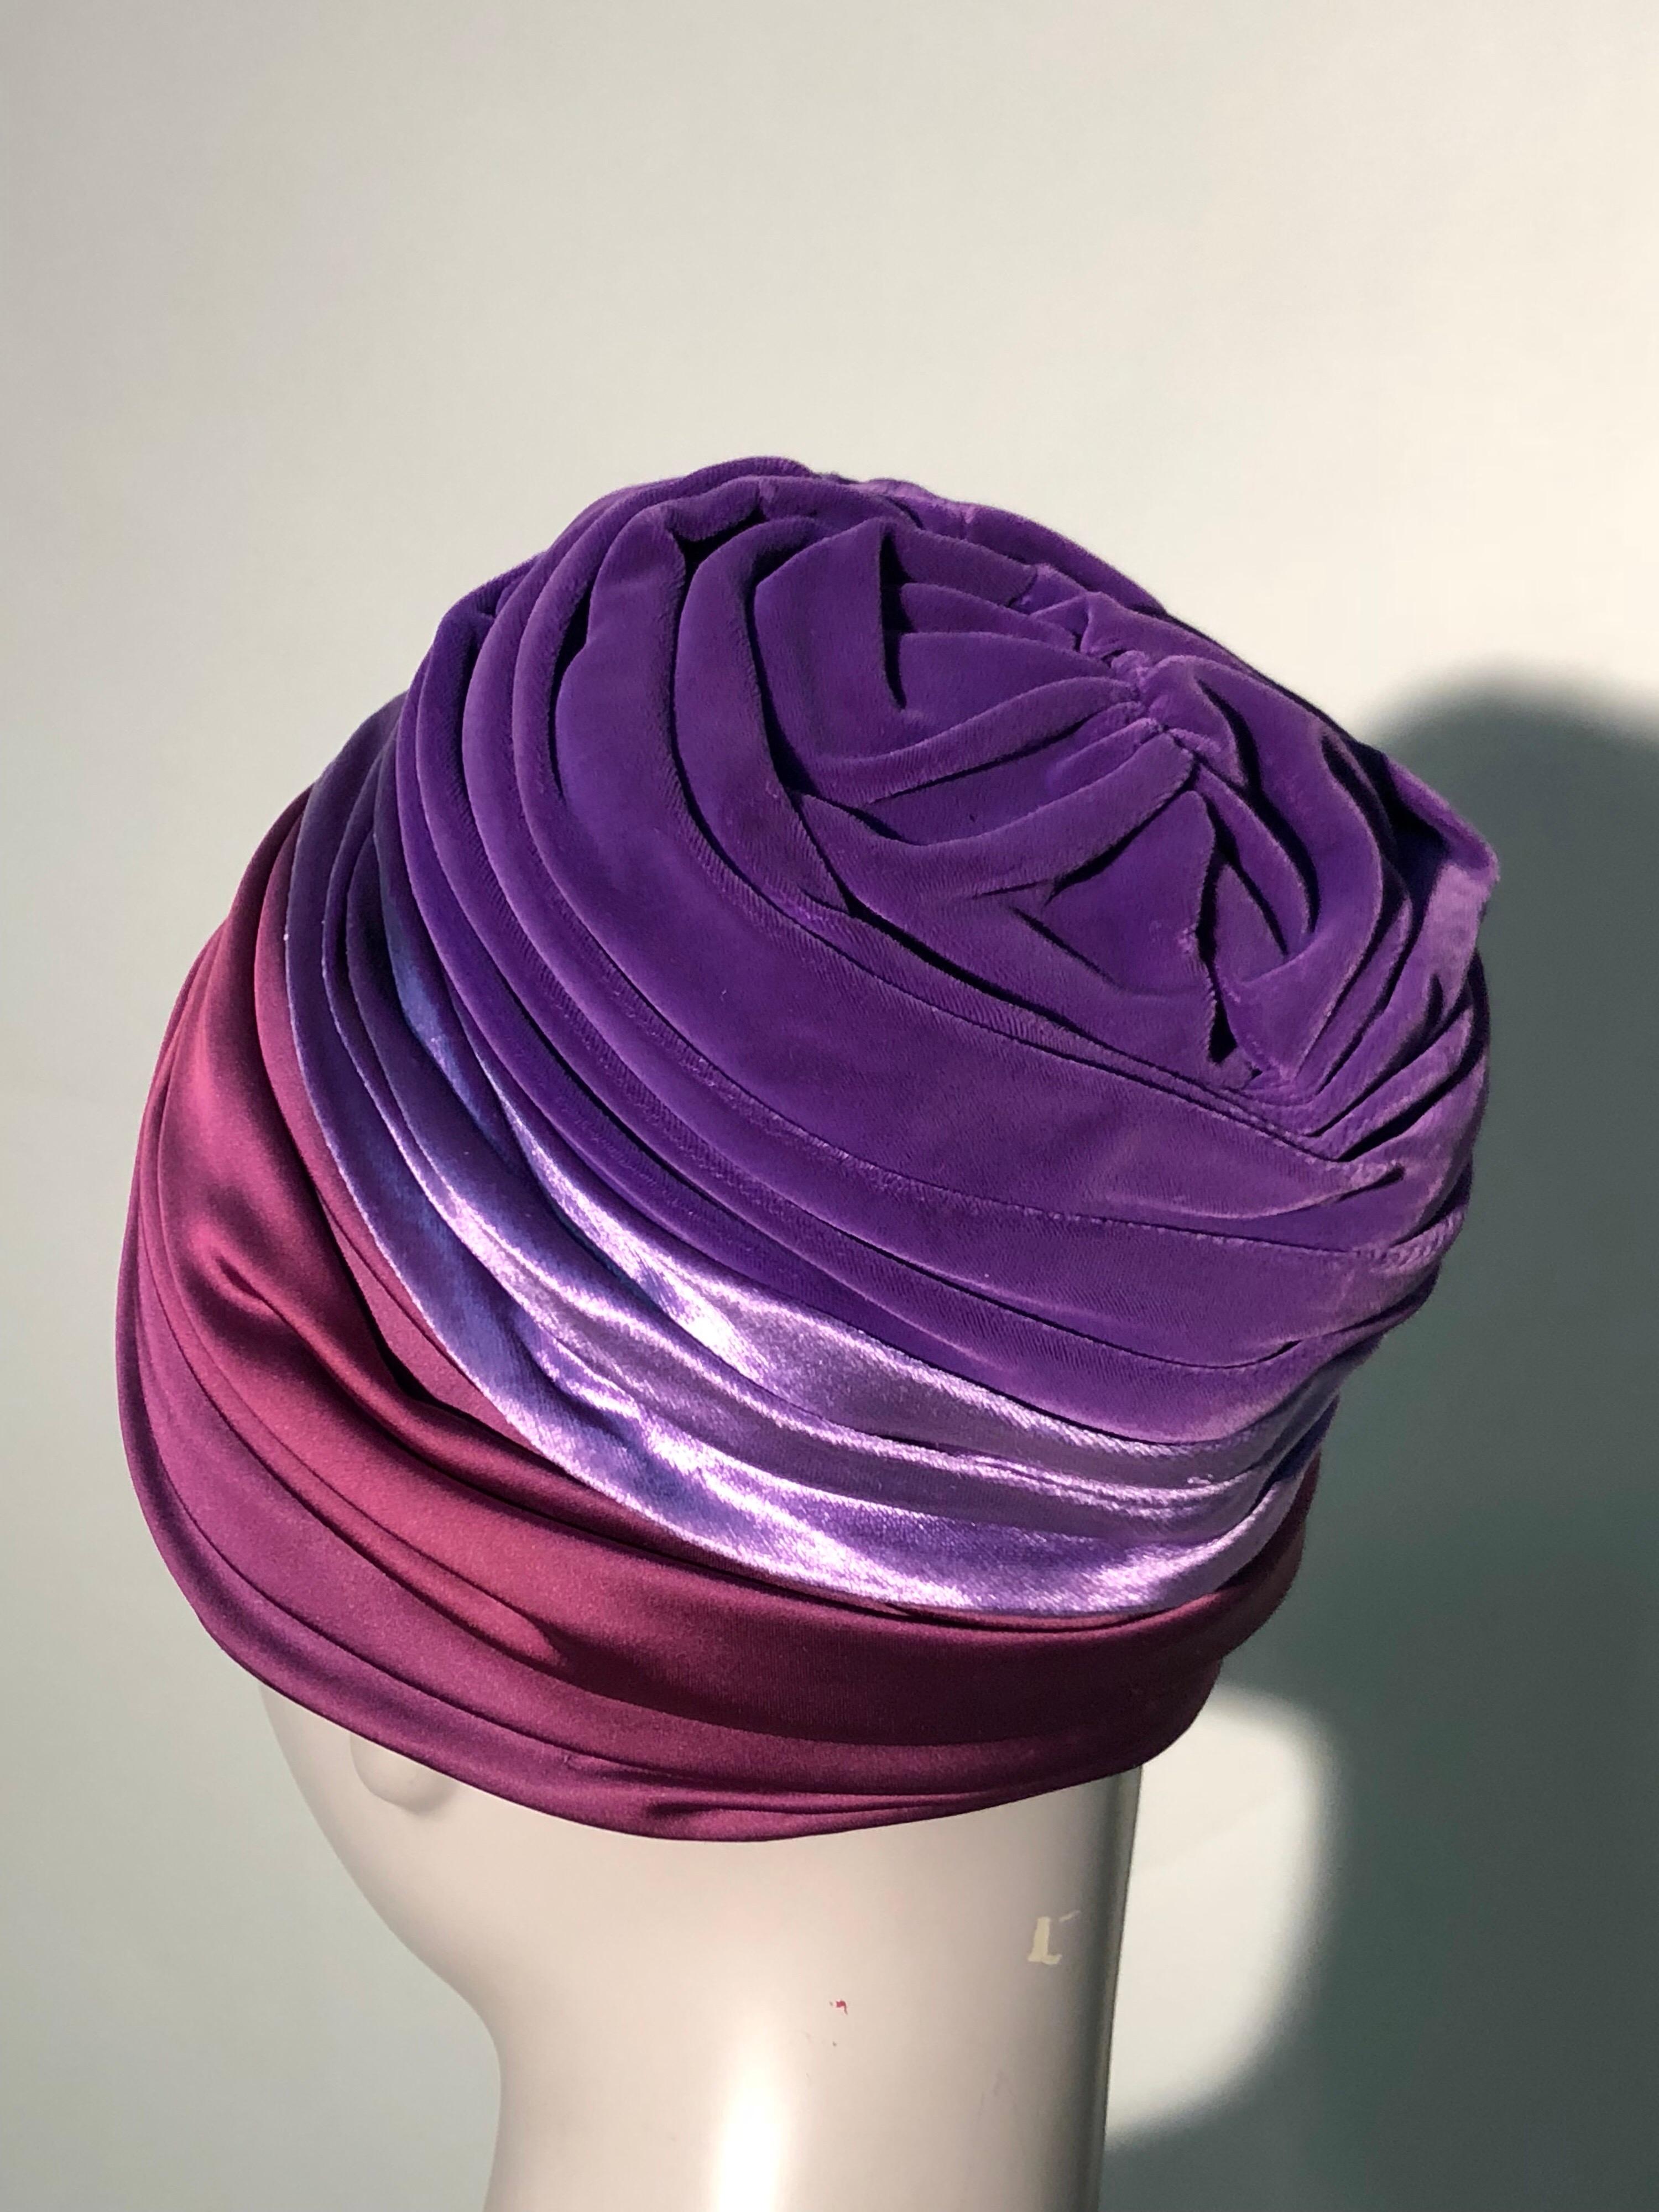 1950s Tri-Color Purple Burgundy and Rhinstone Turban-Styled Evening Hat In Excellent Condition For Sale In Gresham, OR